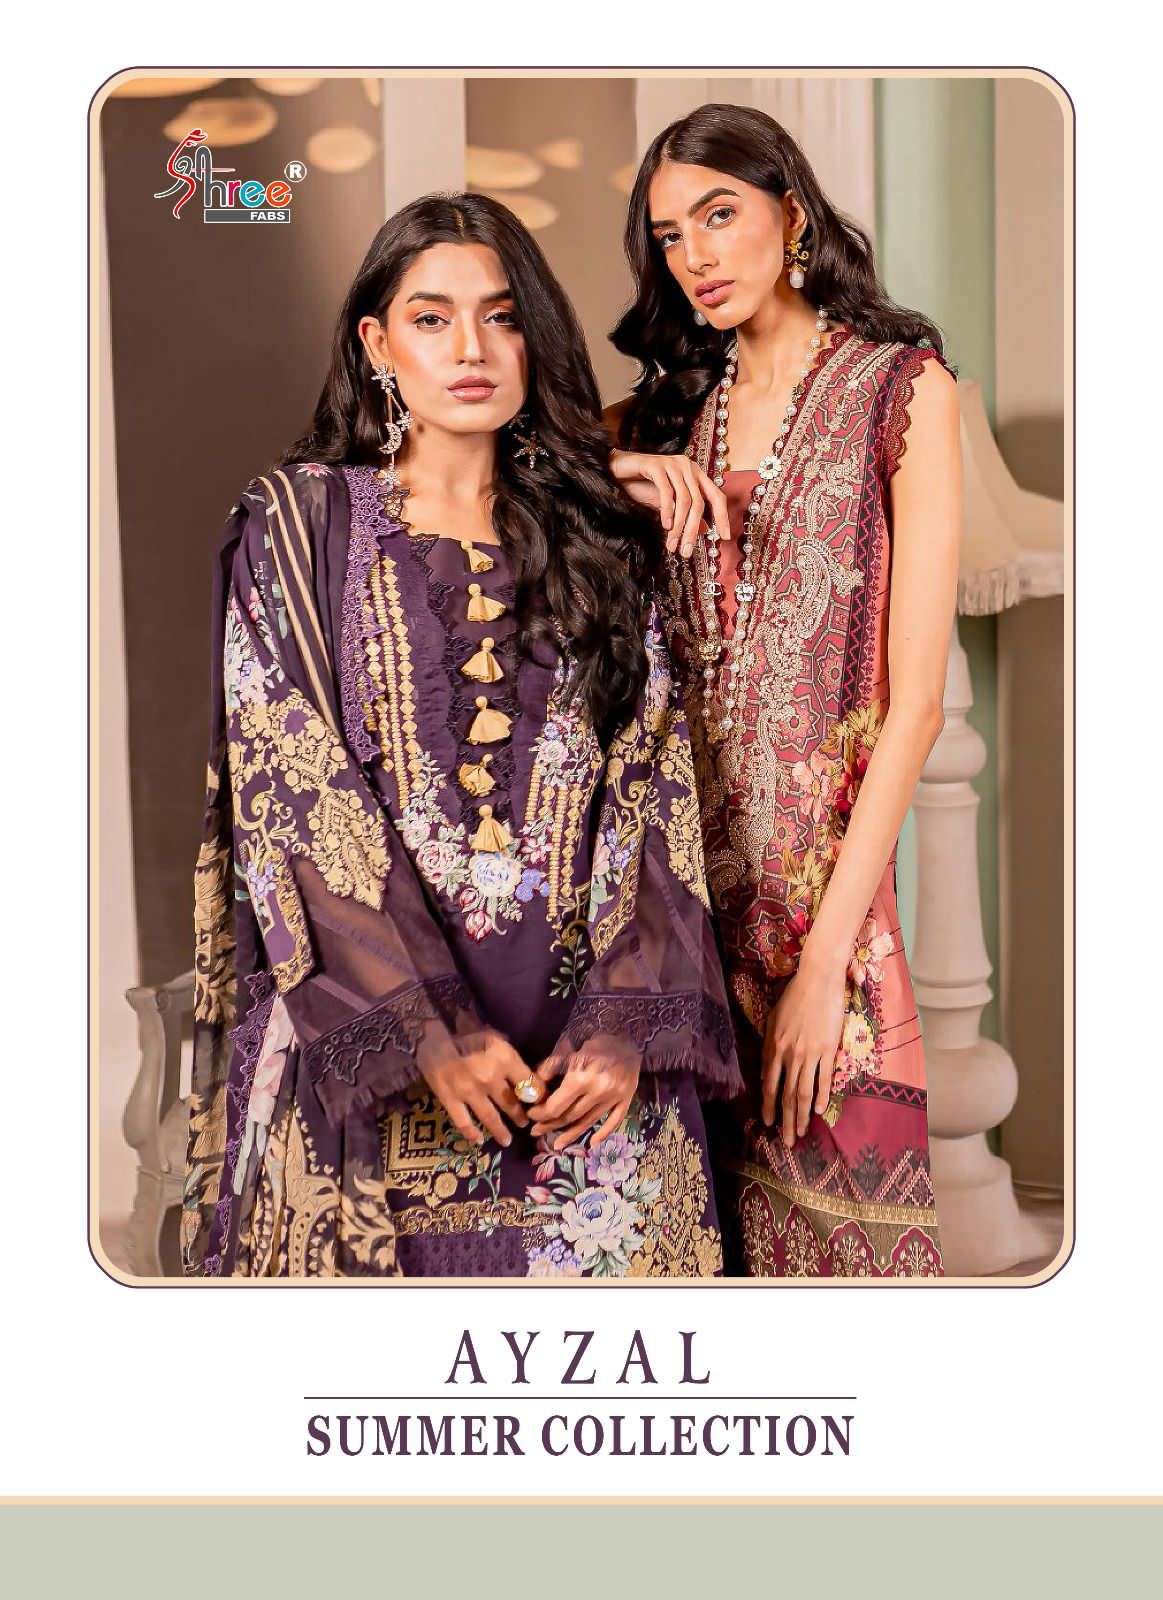 SHREE FABS AYZEL SUMMER COLLECTION COTTON PAKISTANI SUITS SU...